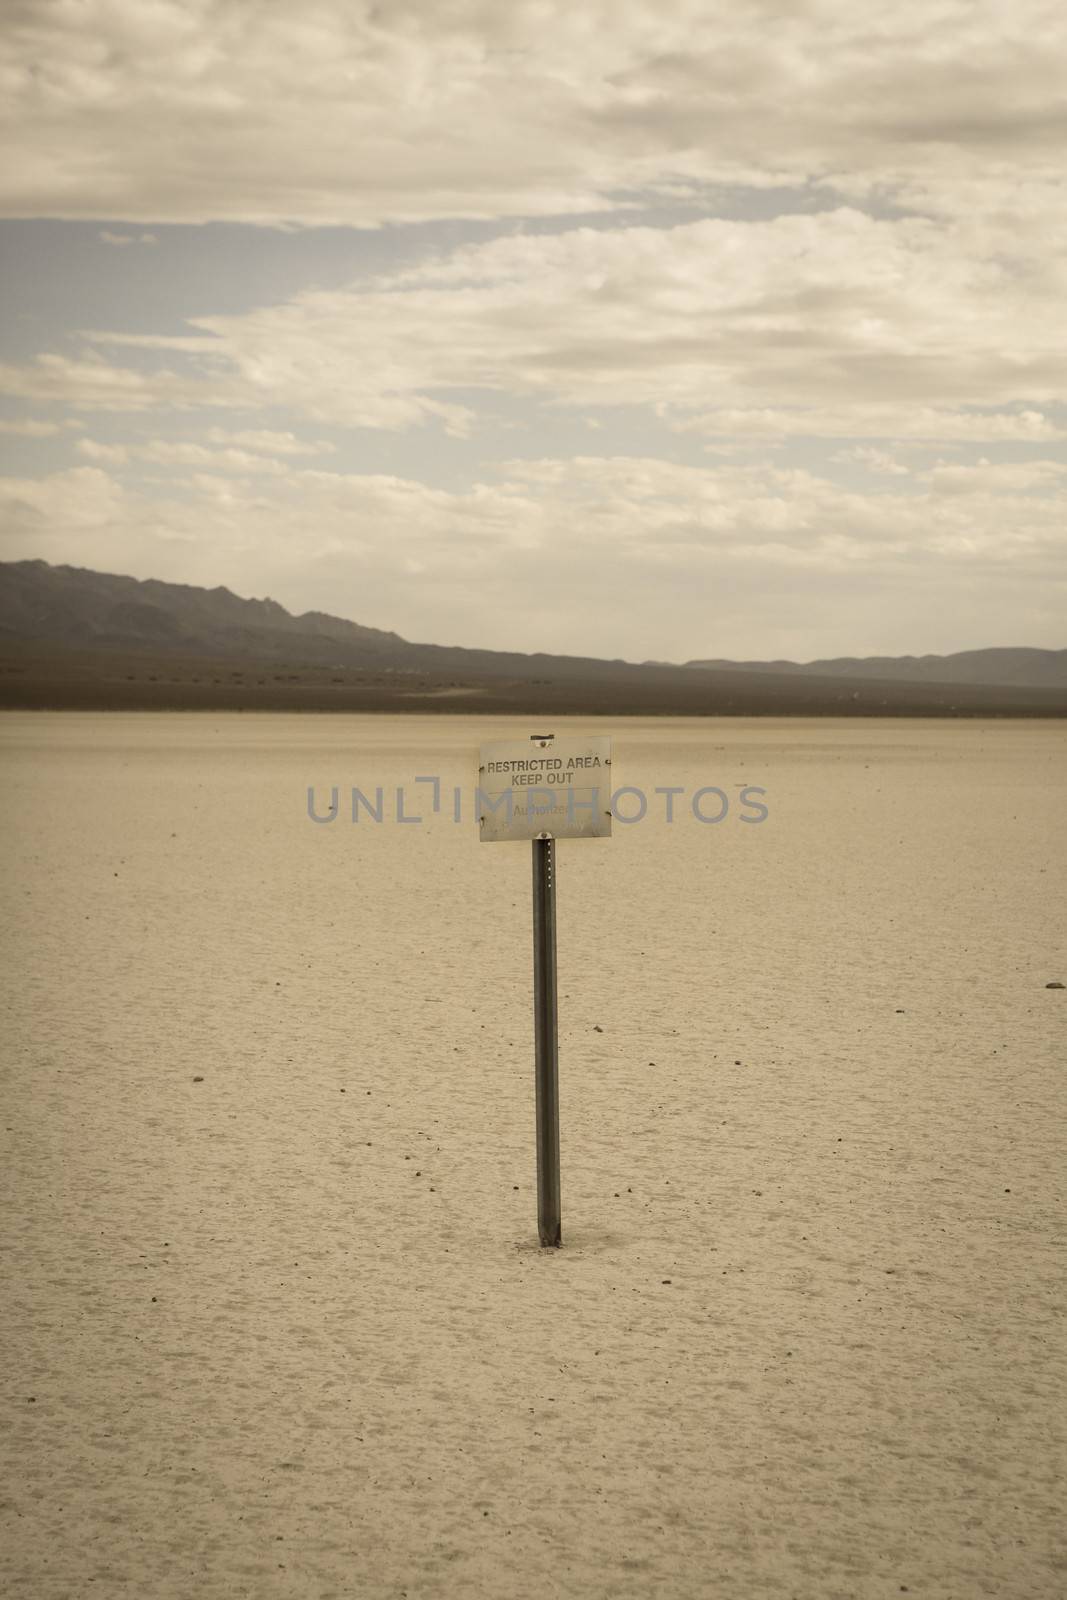 Sign restricted area keep out in the desert of Nevada, retro style image